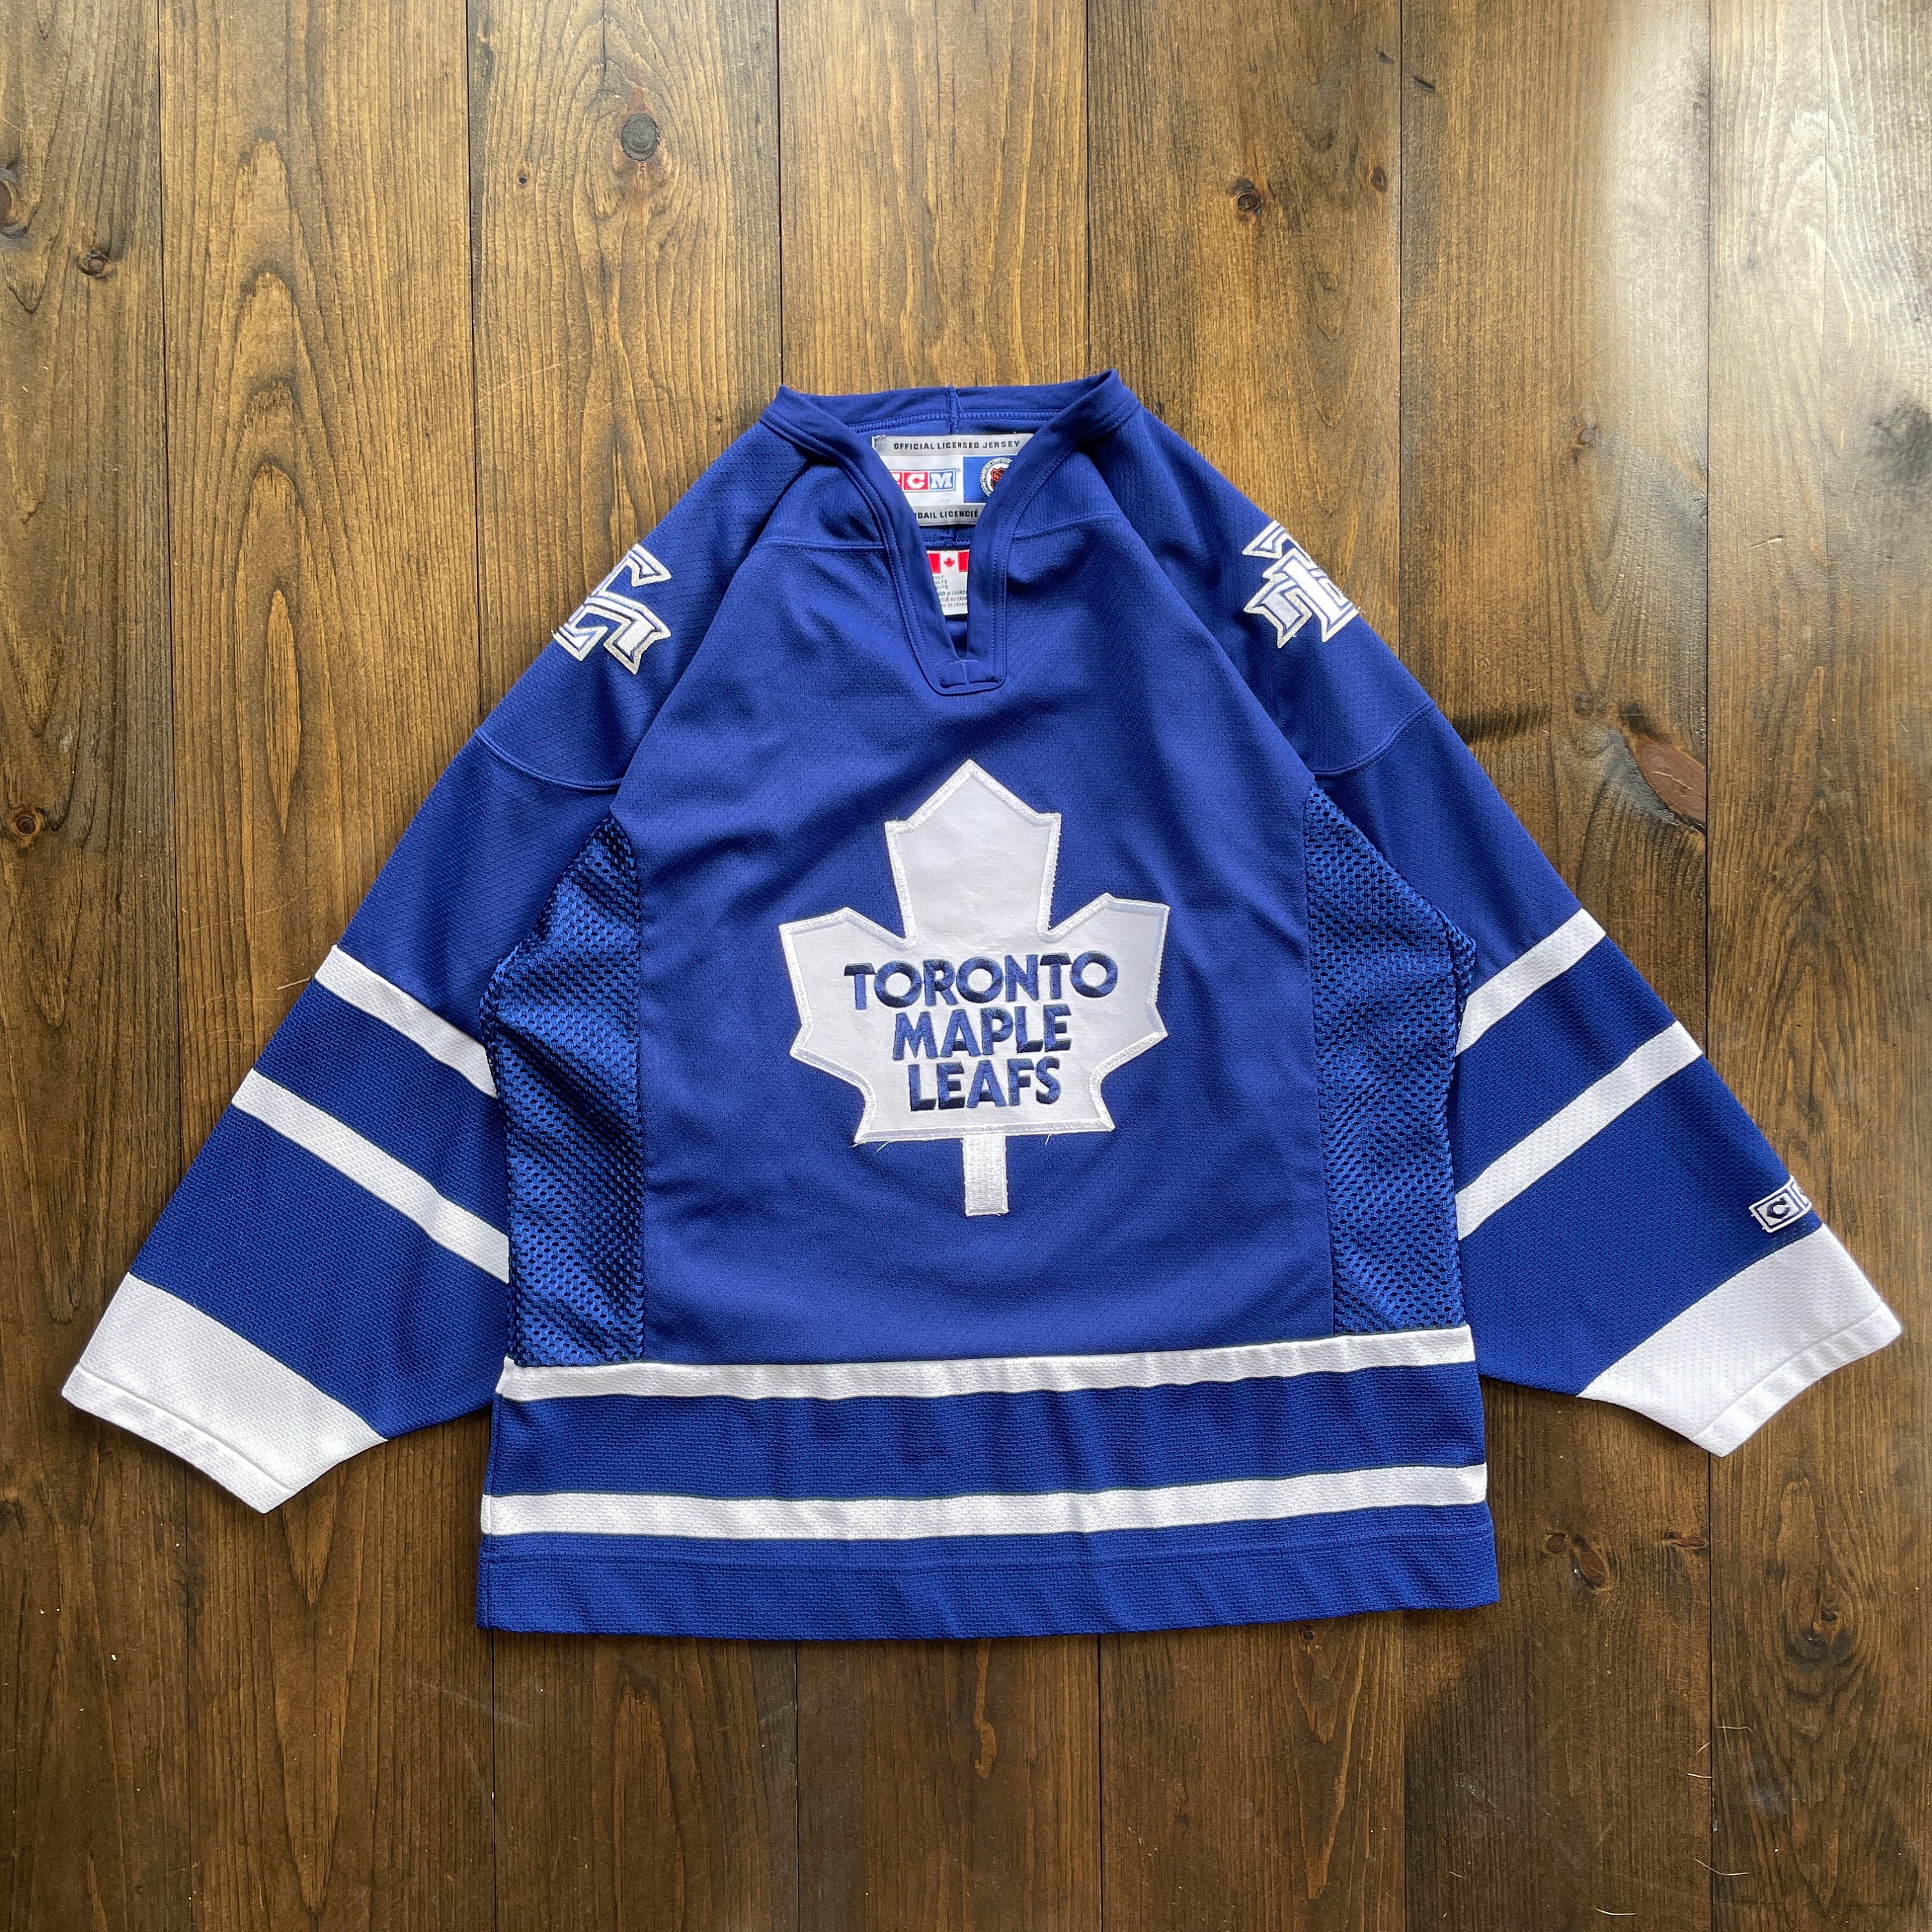 NWT-WOMEN-XL ANY NAME-NUMBER TORONTO MAPLE LEAFS PINK NHL LICENSE REEBOK  JERSEY